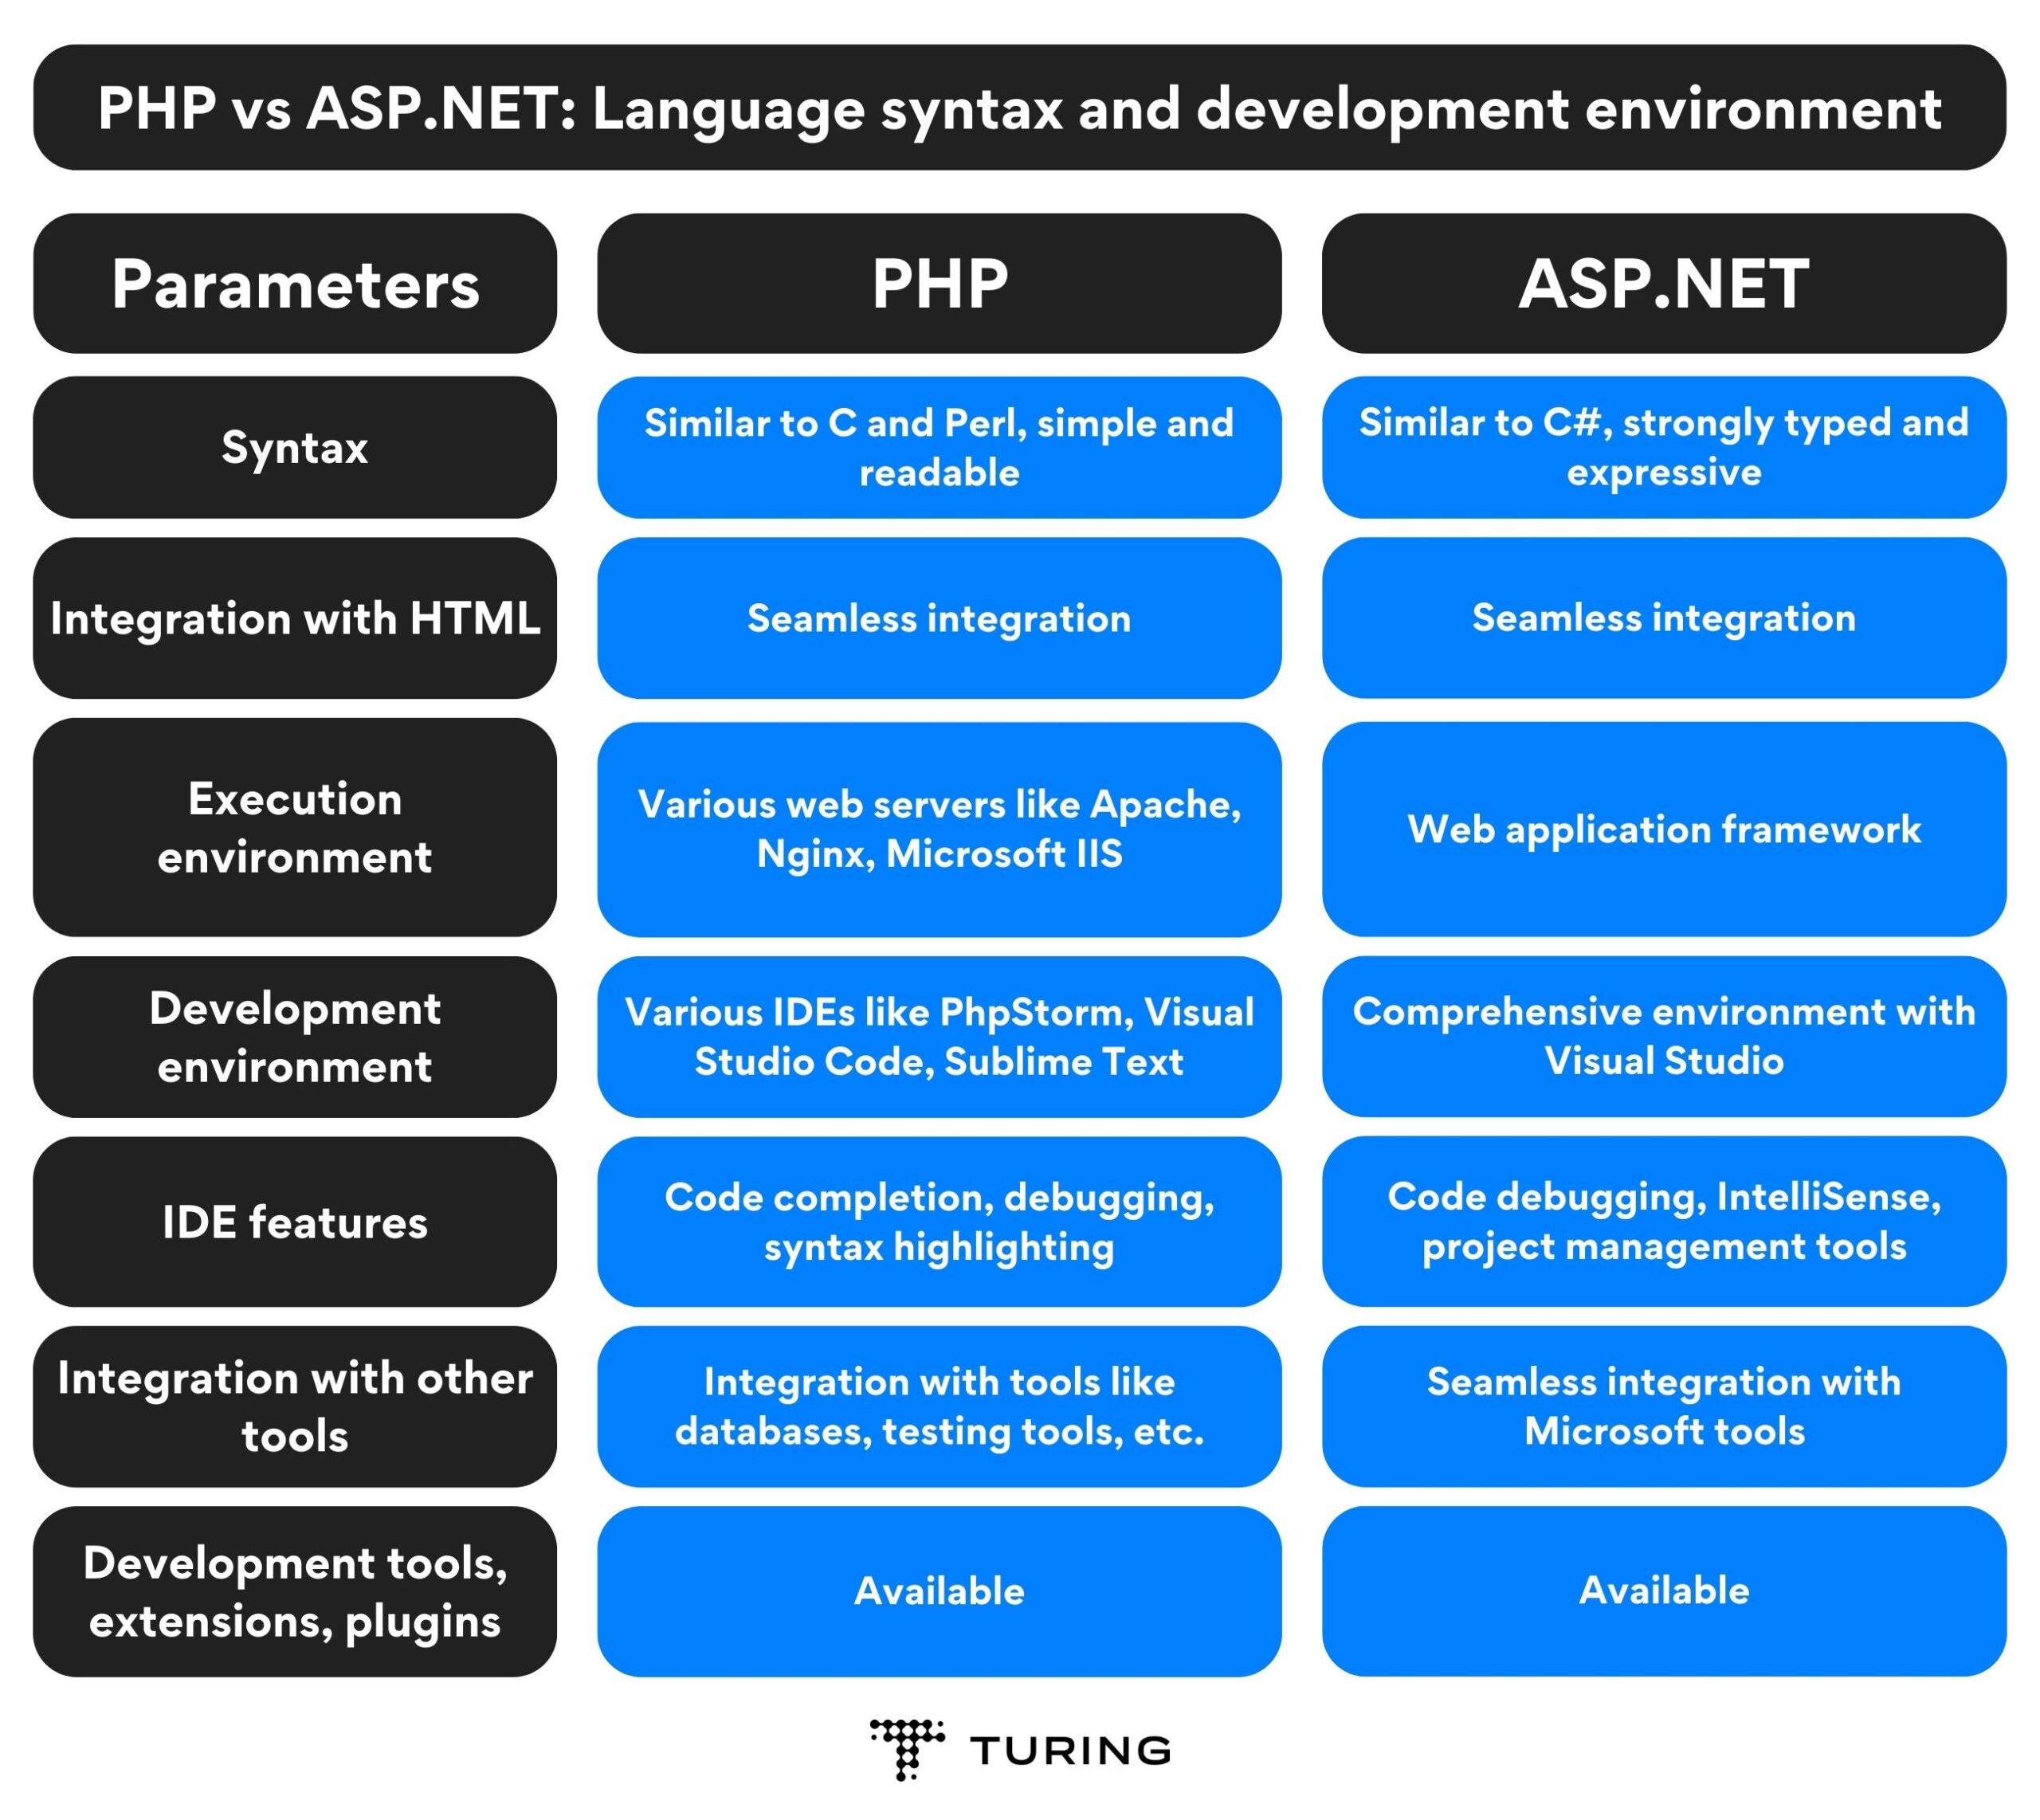 PHP vs ASP.NET: Language syntax and development environment